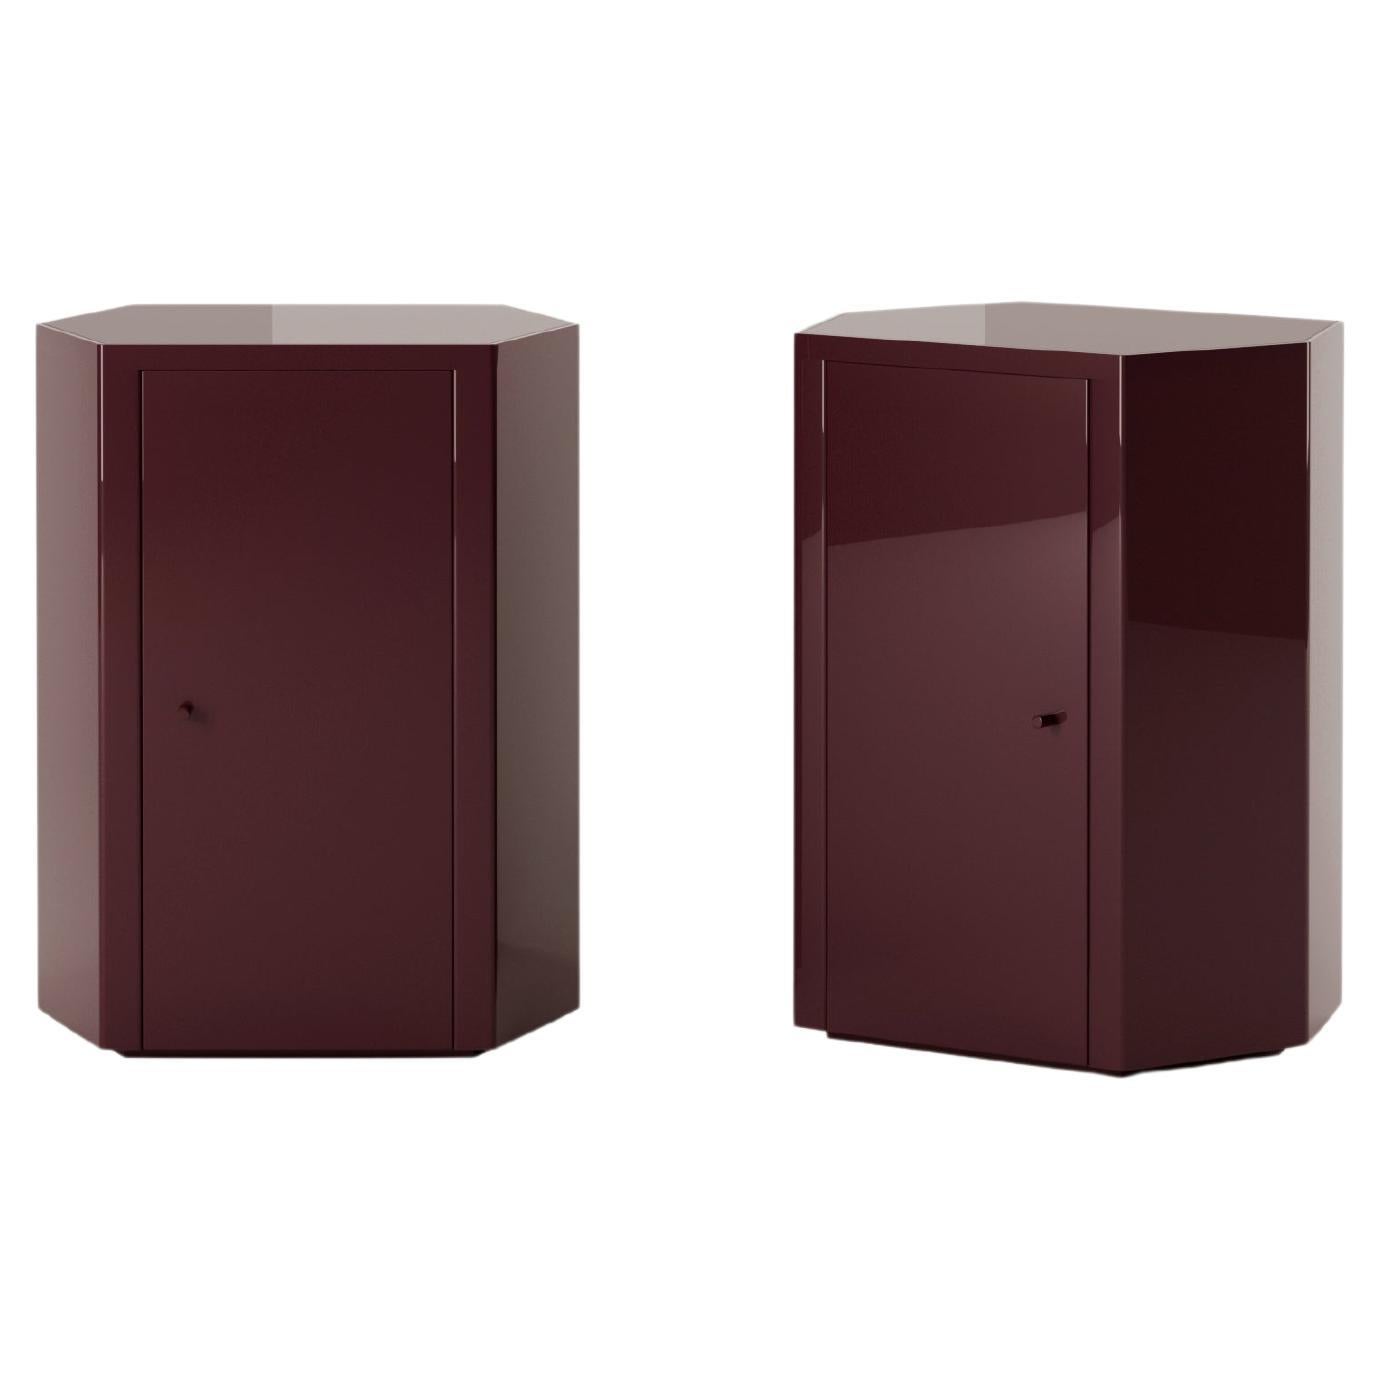 Pair of Park Night Stands in Noir Oxblood Lacquer by Yaniv Chen for Lemon For Sale